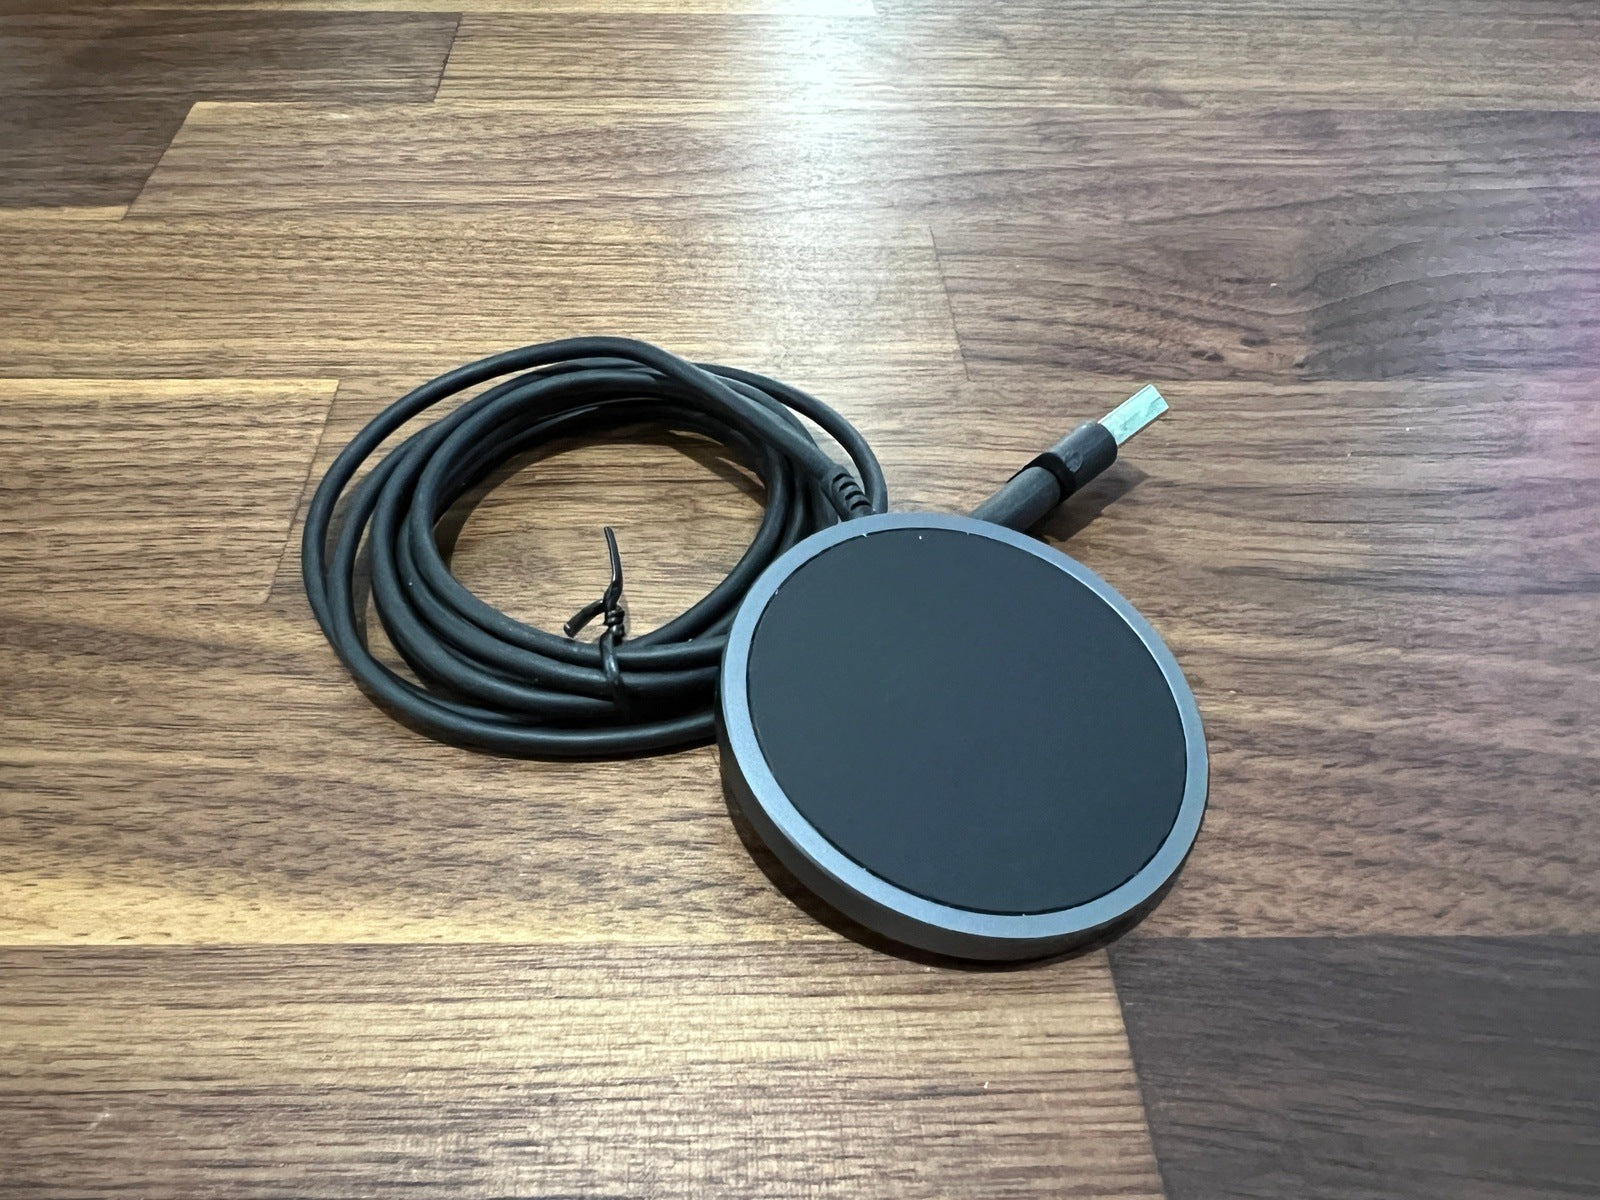 JSAUX Magnetic Wireless Charger